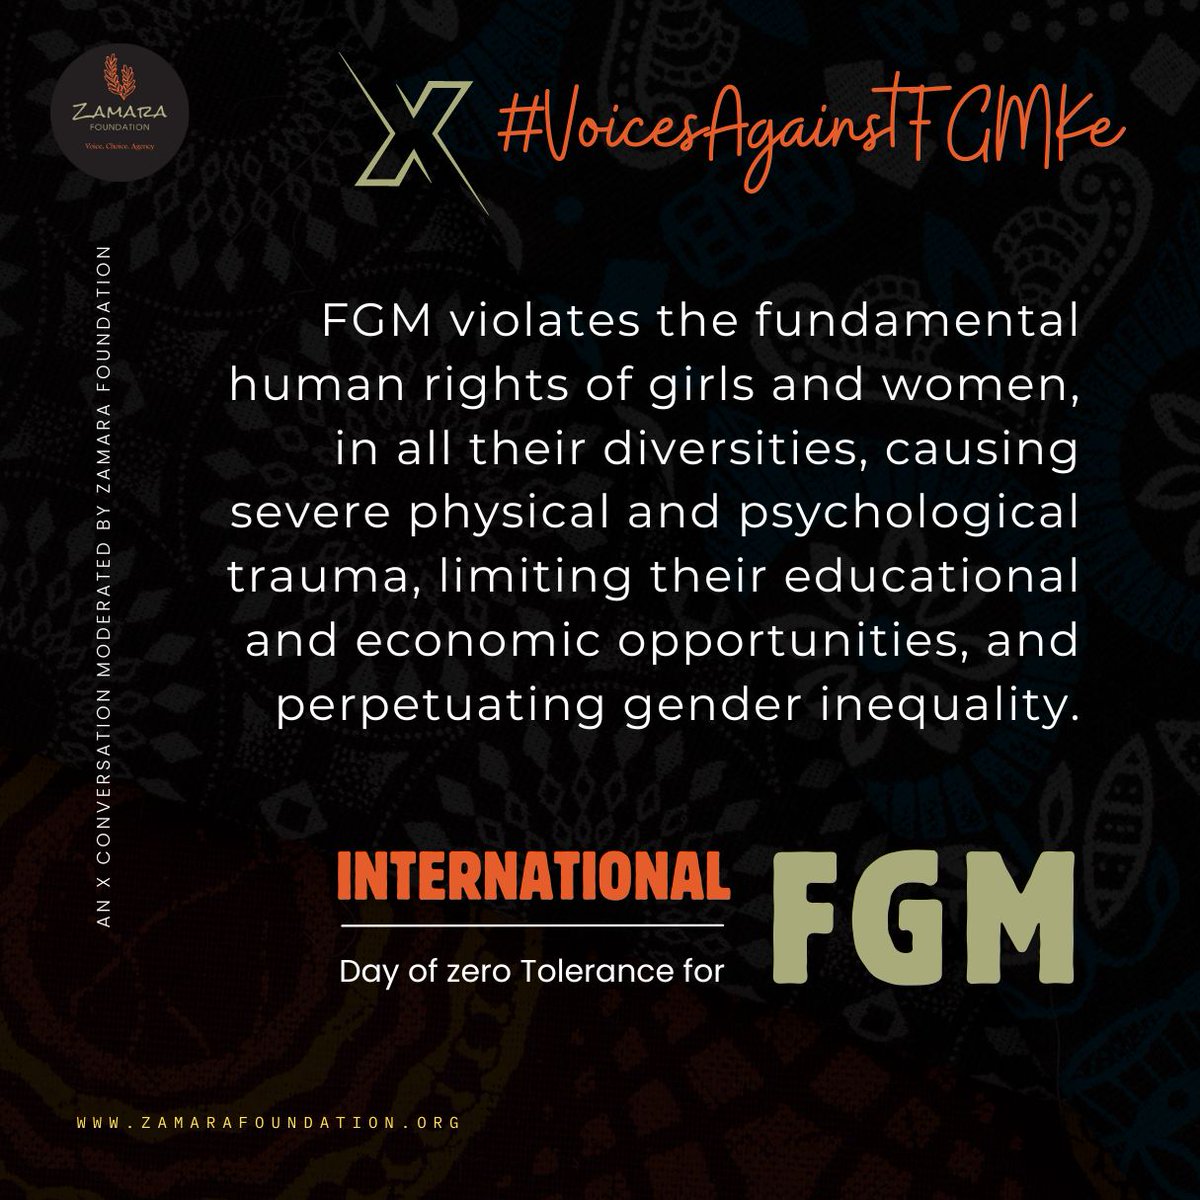 FGM has an enormous amount of side effects and mental repercussions and it should STOP by all means necessary.
We demand for the End of FGM .@Zamara_fdn #ZamaraVoices #VoicesAgainstFGMKe @polycomdev